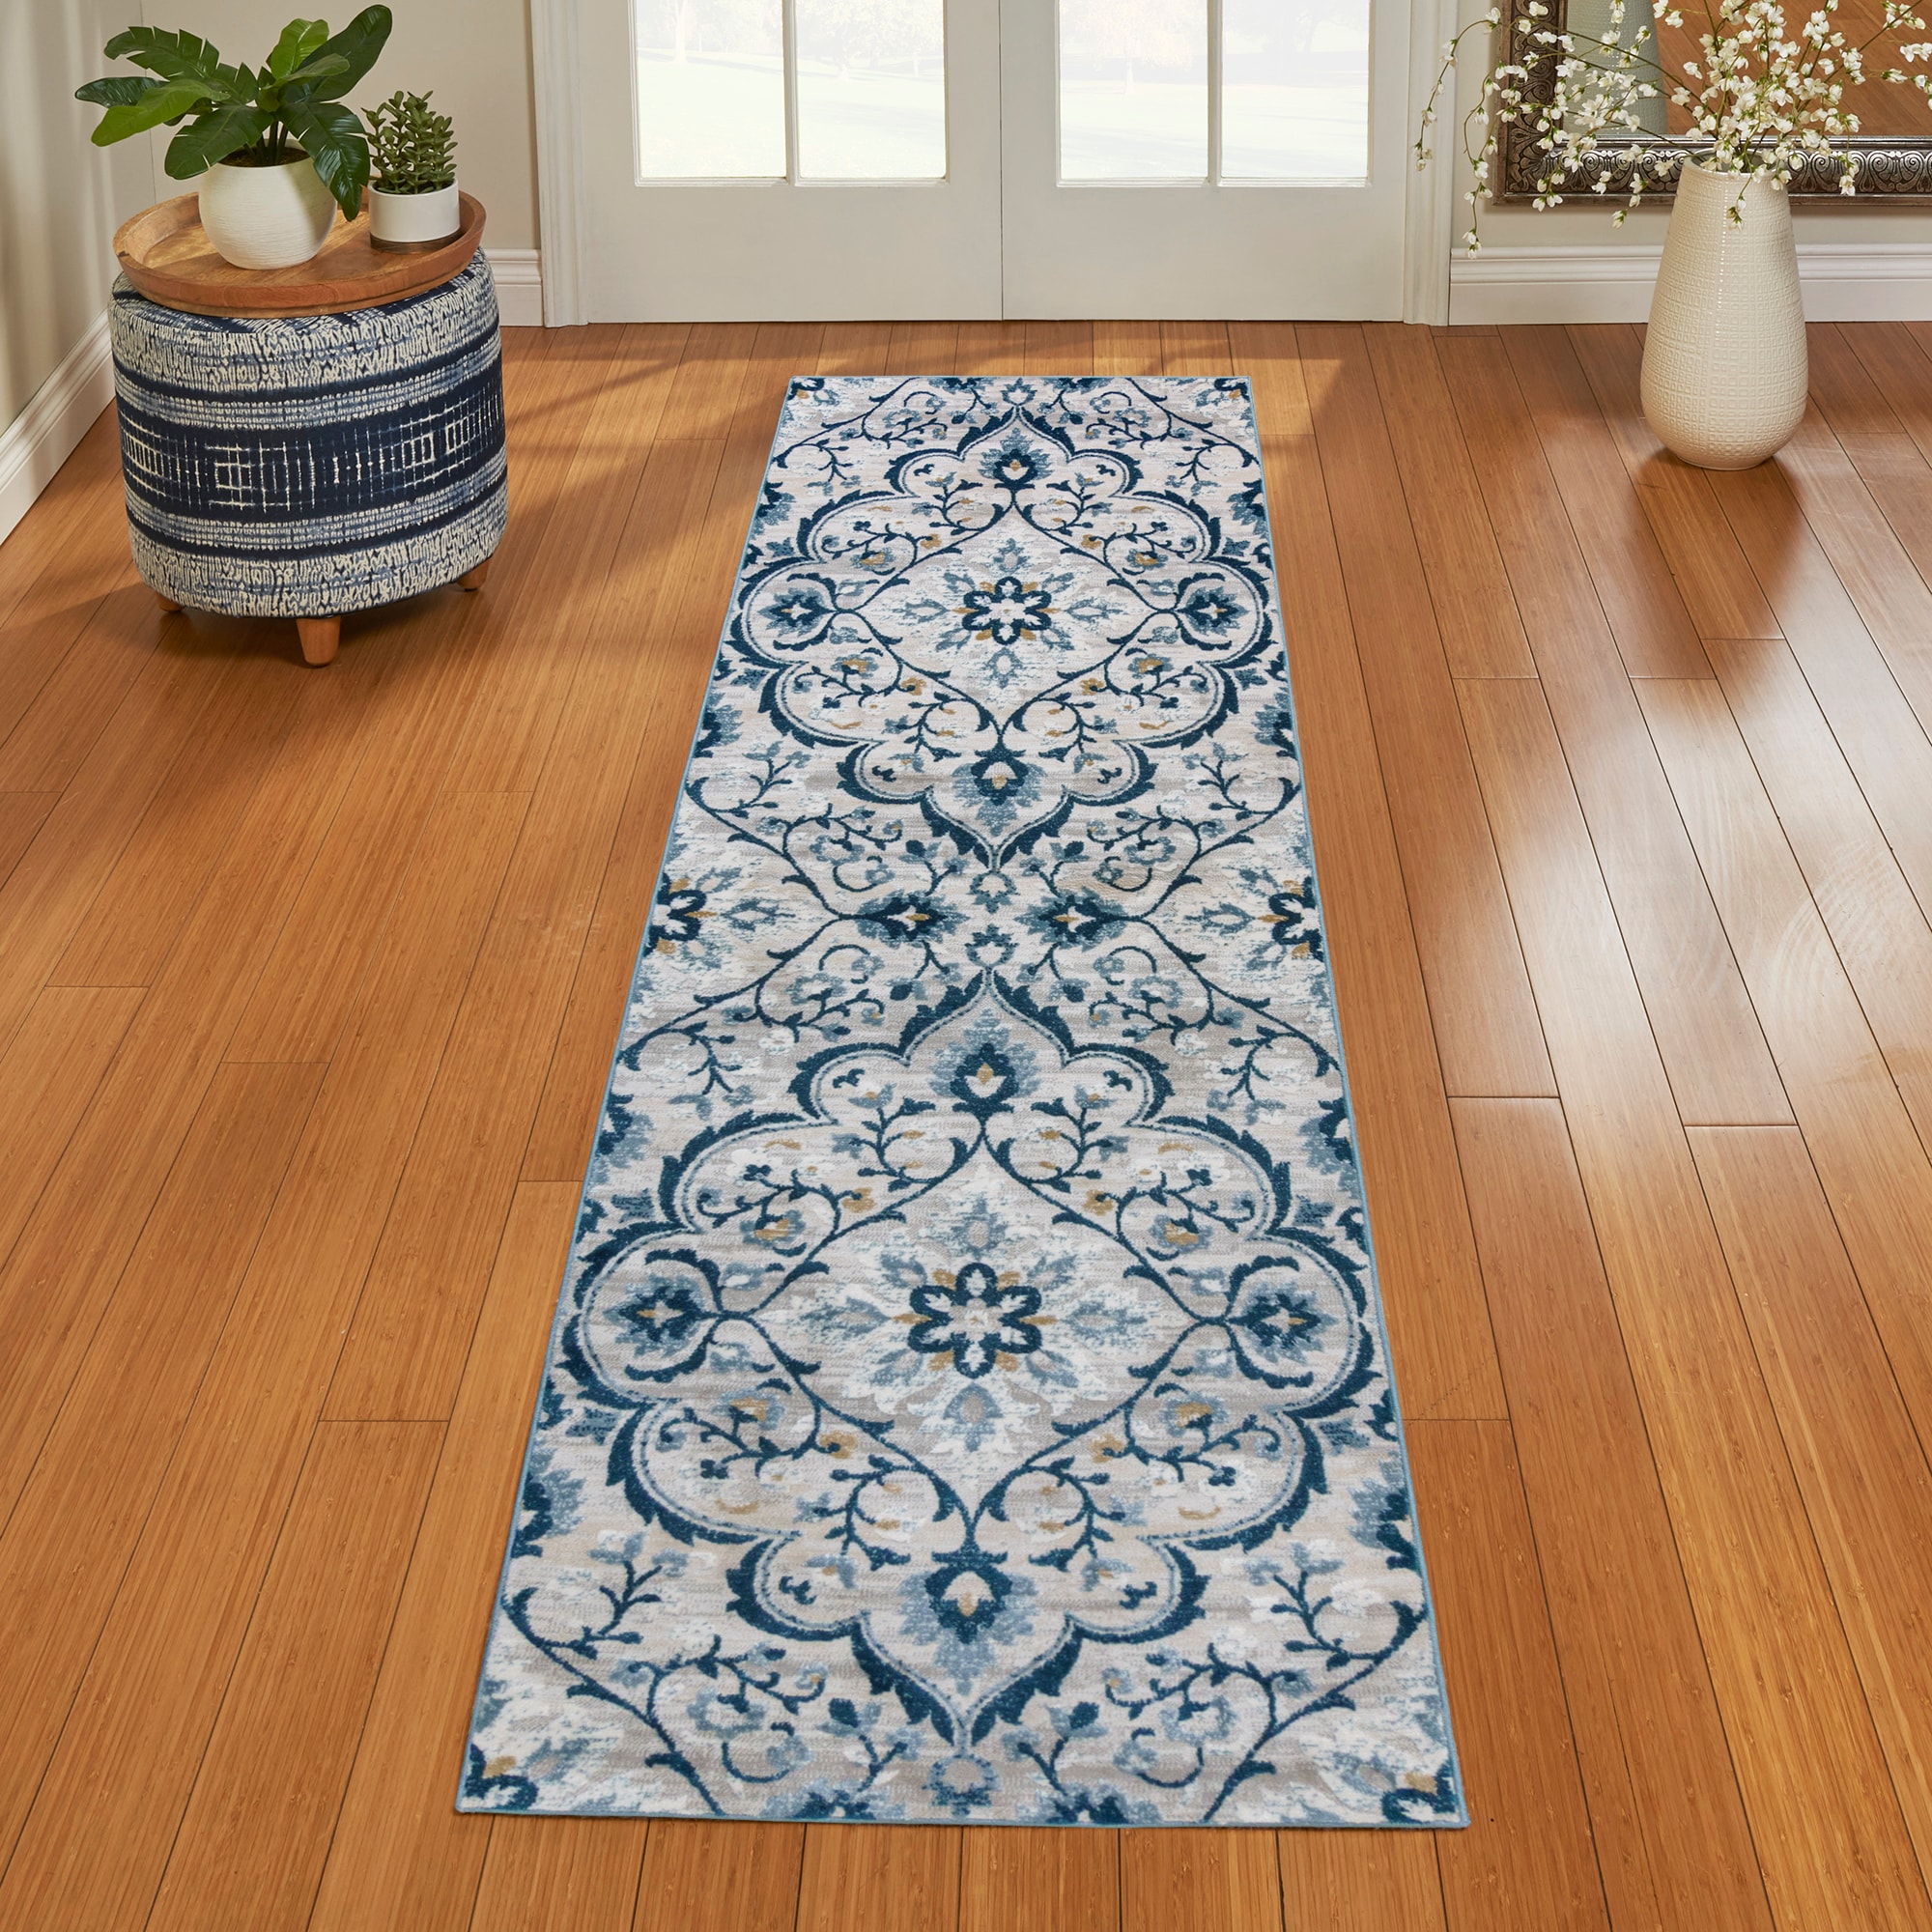 MODERN & CHEAP & QUALITY CARPETS Round Feltback IVANO green Bedroom RUG ANY SIZE 